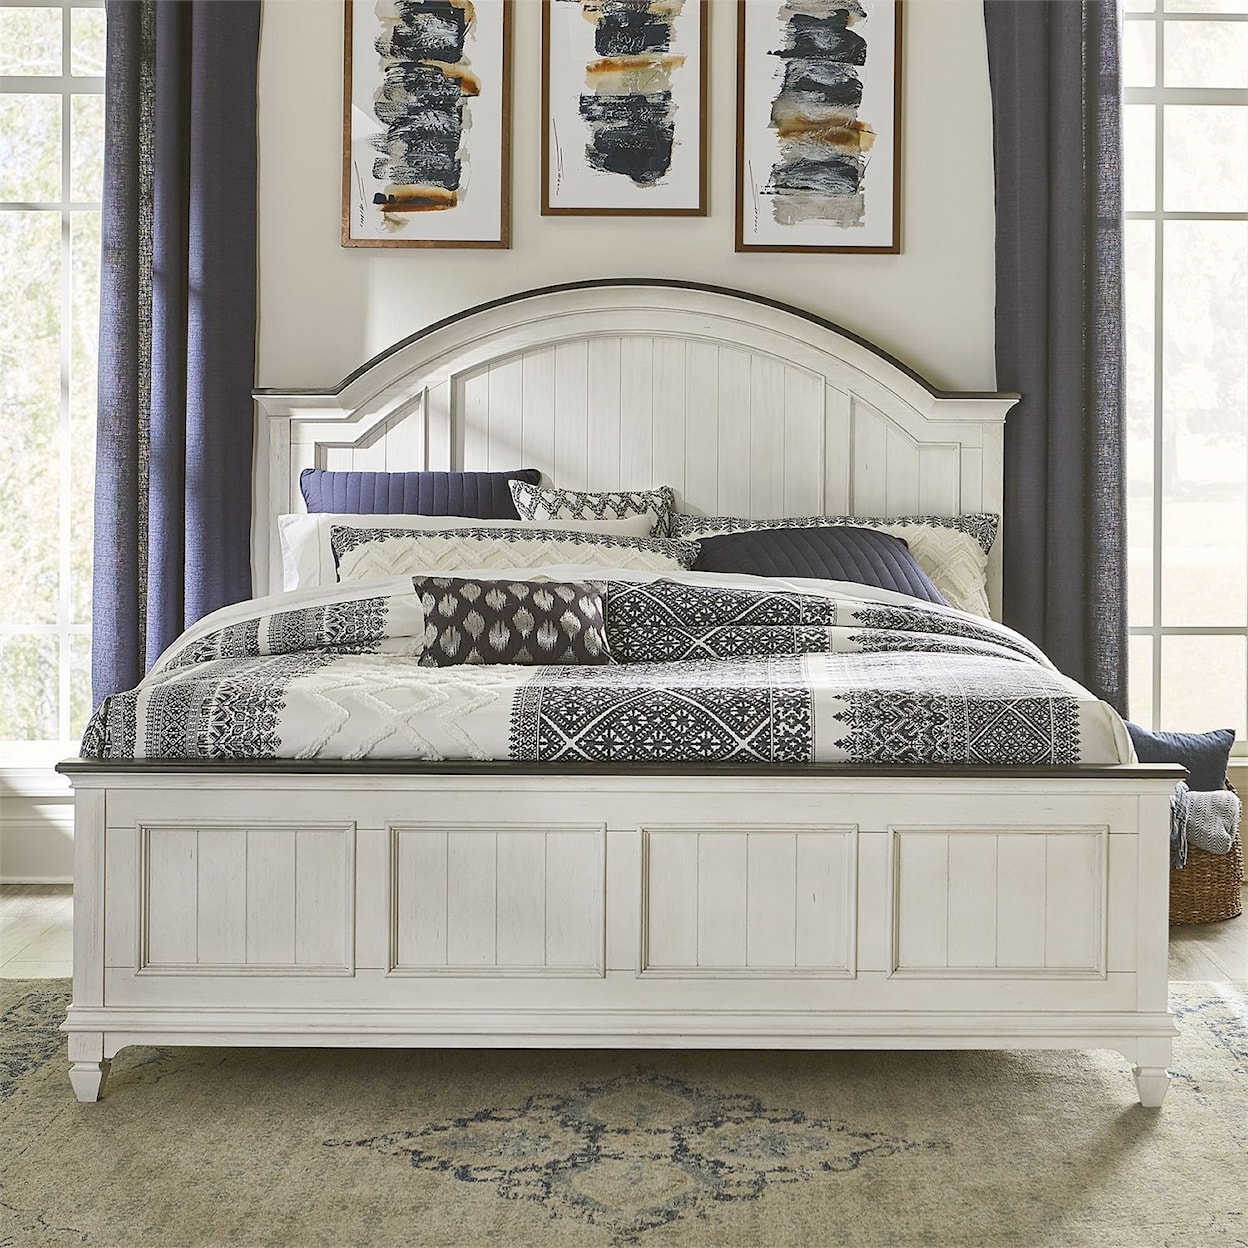 Liberty Furniture Allyson Park King Arched Panel Bed